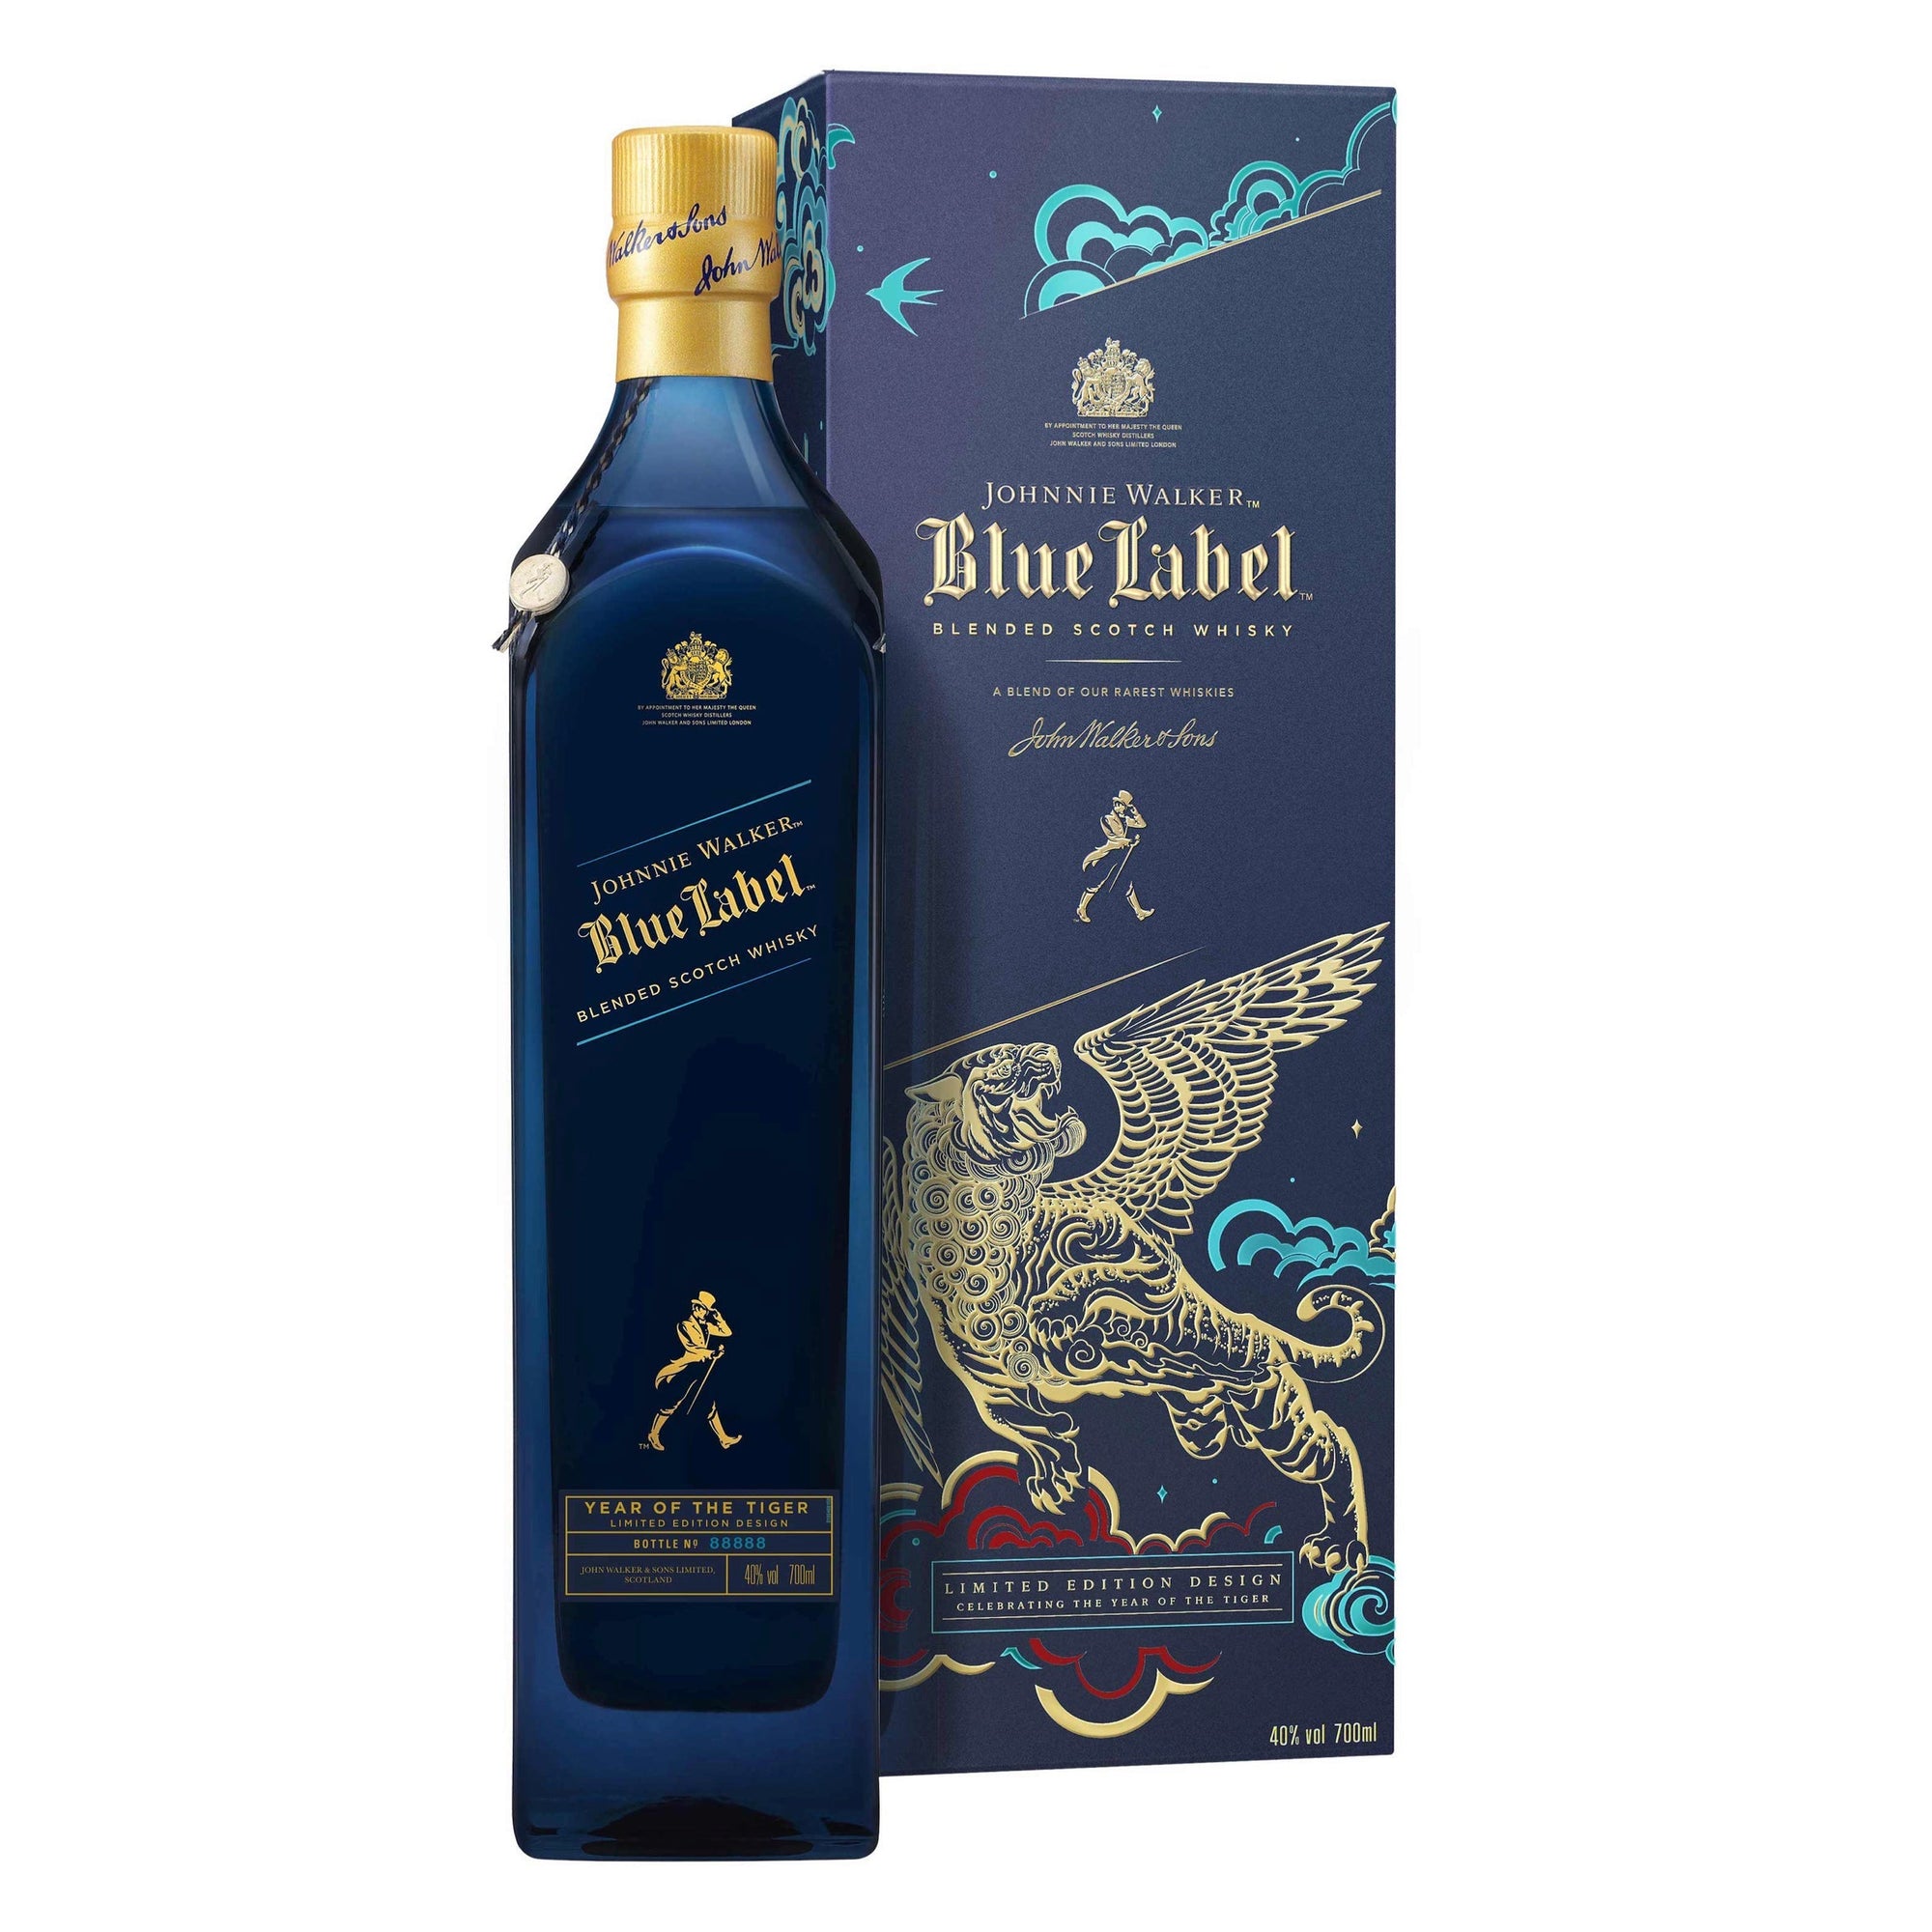 JW Whisky LIQUORS-SPIRITS TIGER  F22 / 75cl [style_5000267185675] Rượu Johnnie Walker Blue Label Blended Scotch Whisky - Year Of The Tiger Limited Edition Design 40% 750ml 04x01